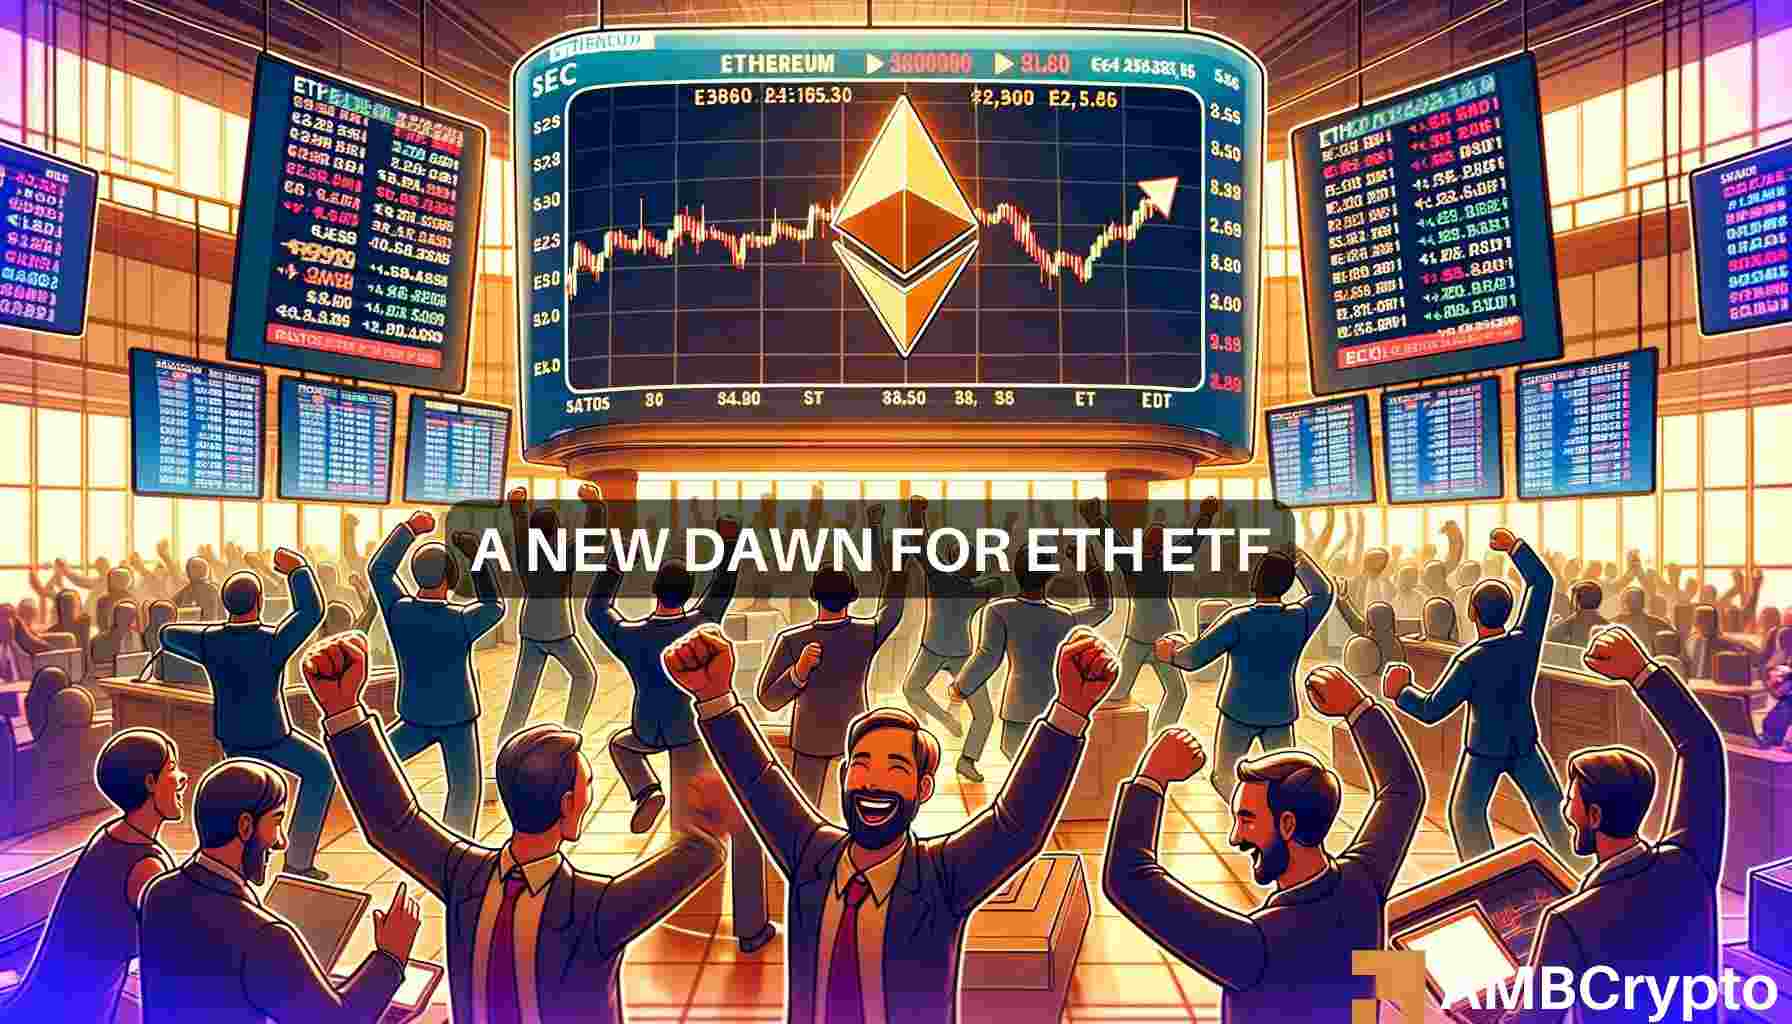 Ethereum ETF approval odds jump from 25% to 75% – What changed?